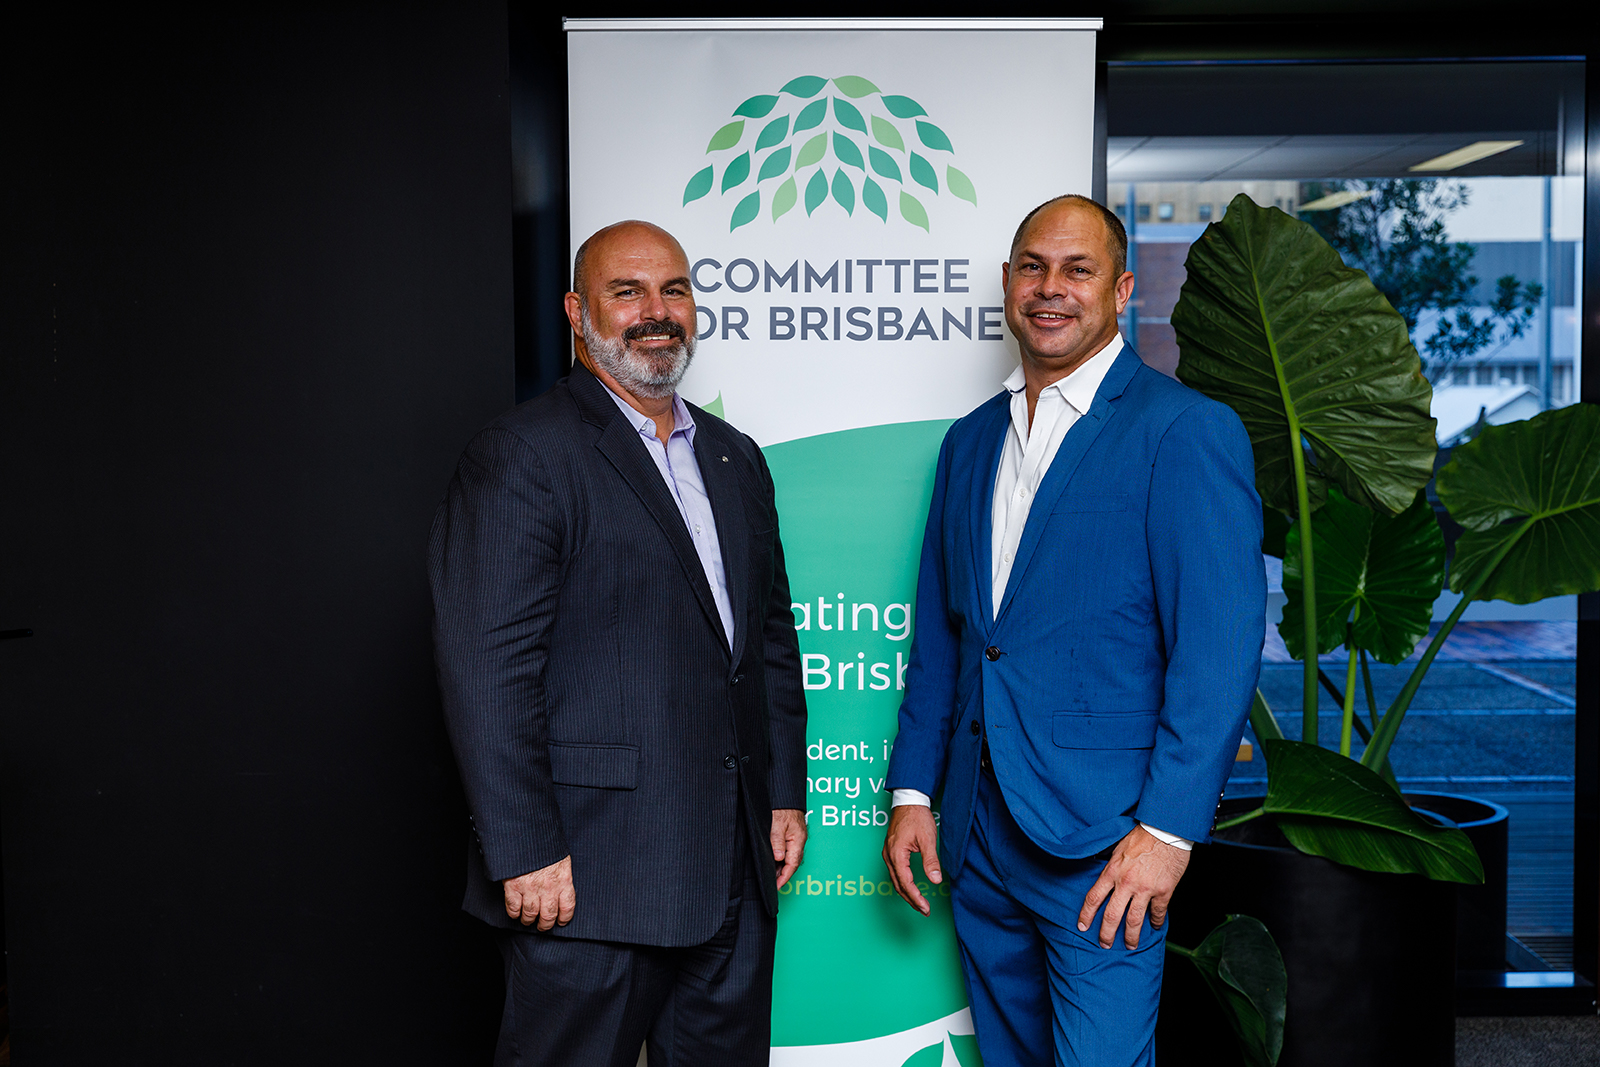 Committee for Brisbane 2020 Patron Briefing